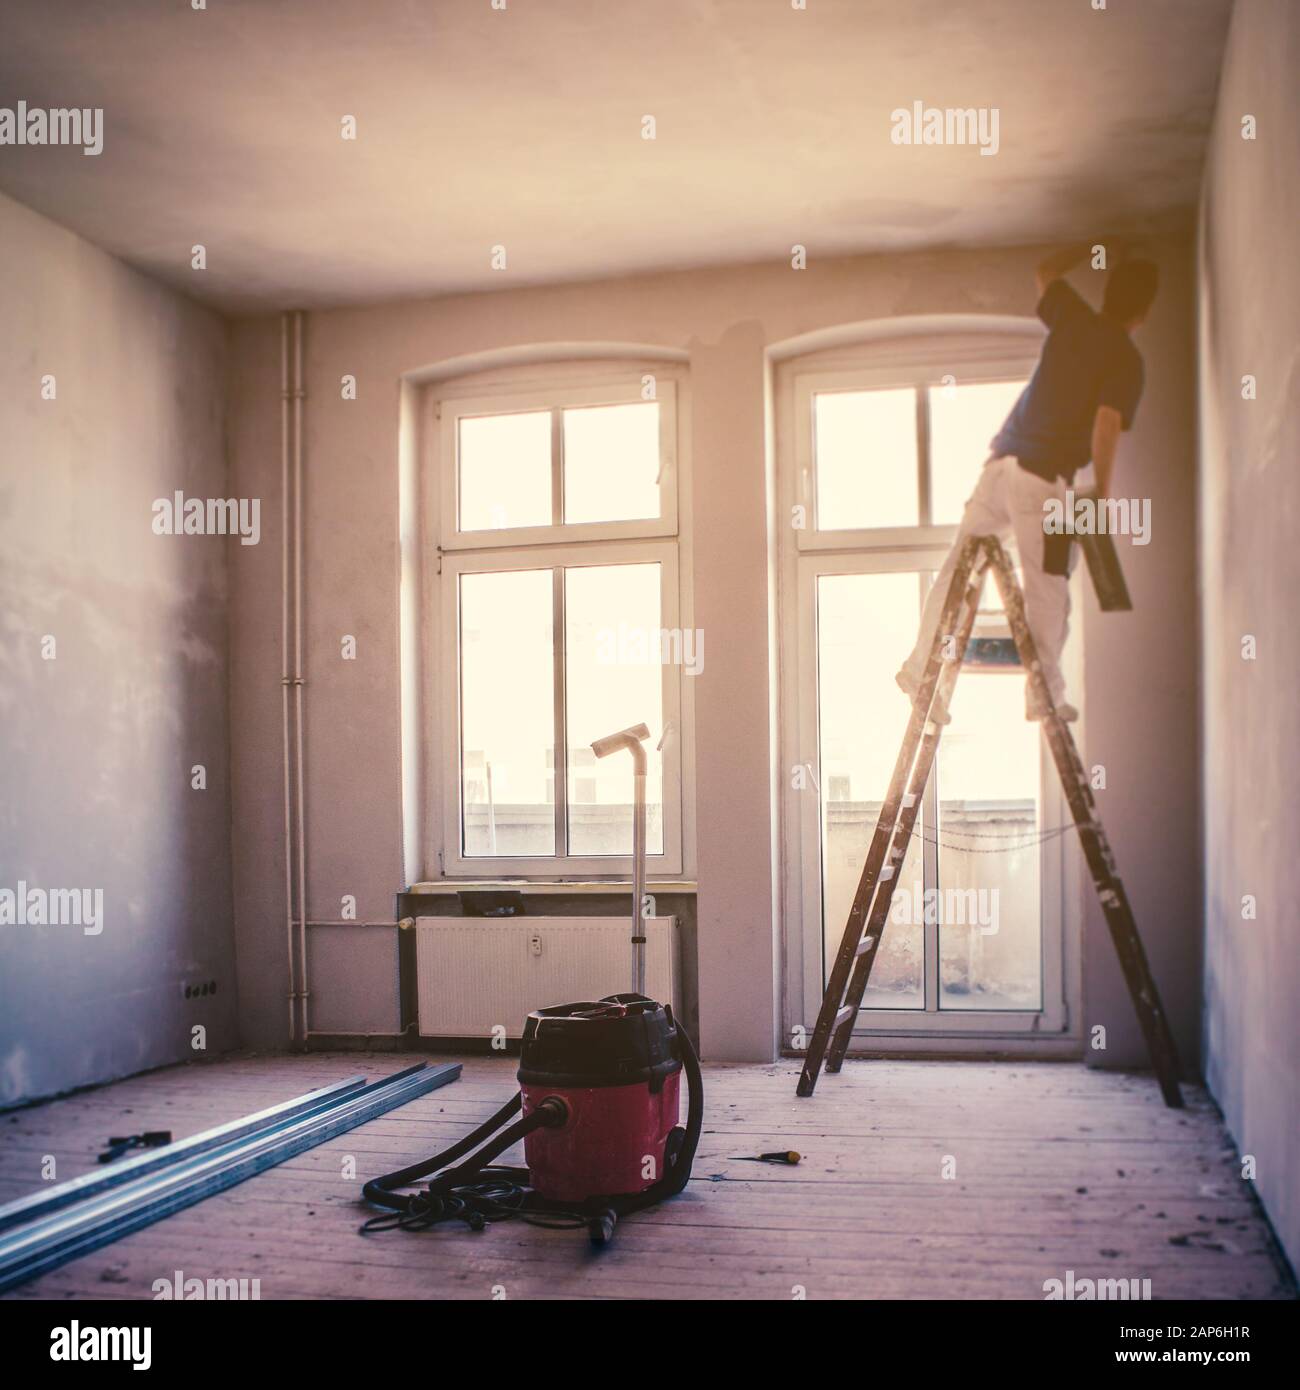 flat renovation concept, blur image of a  person on ladder renovate room Stock Photo